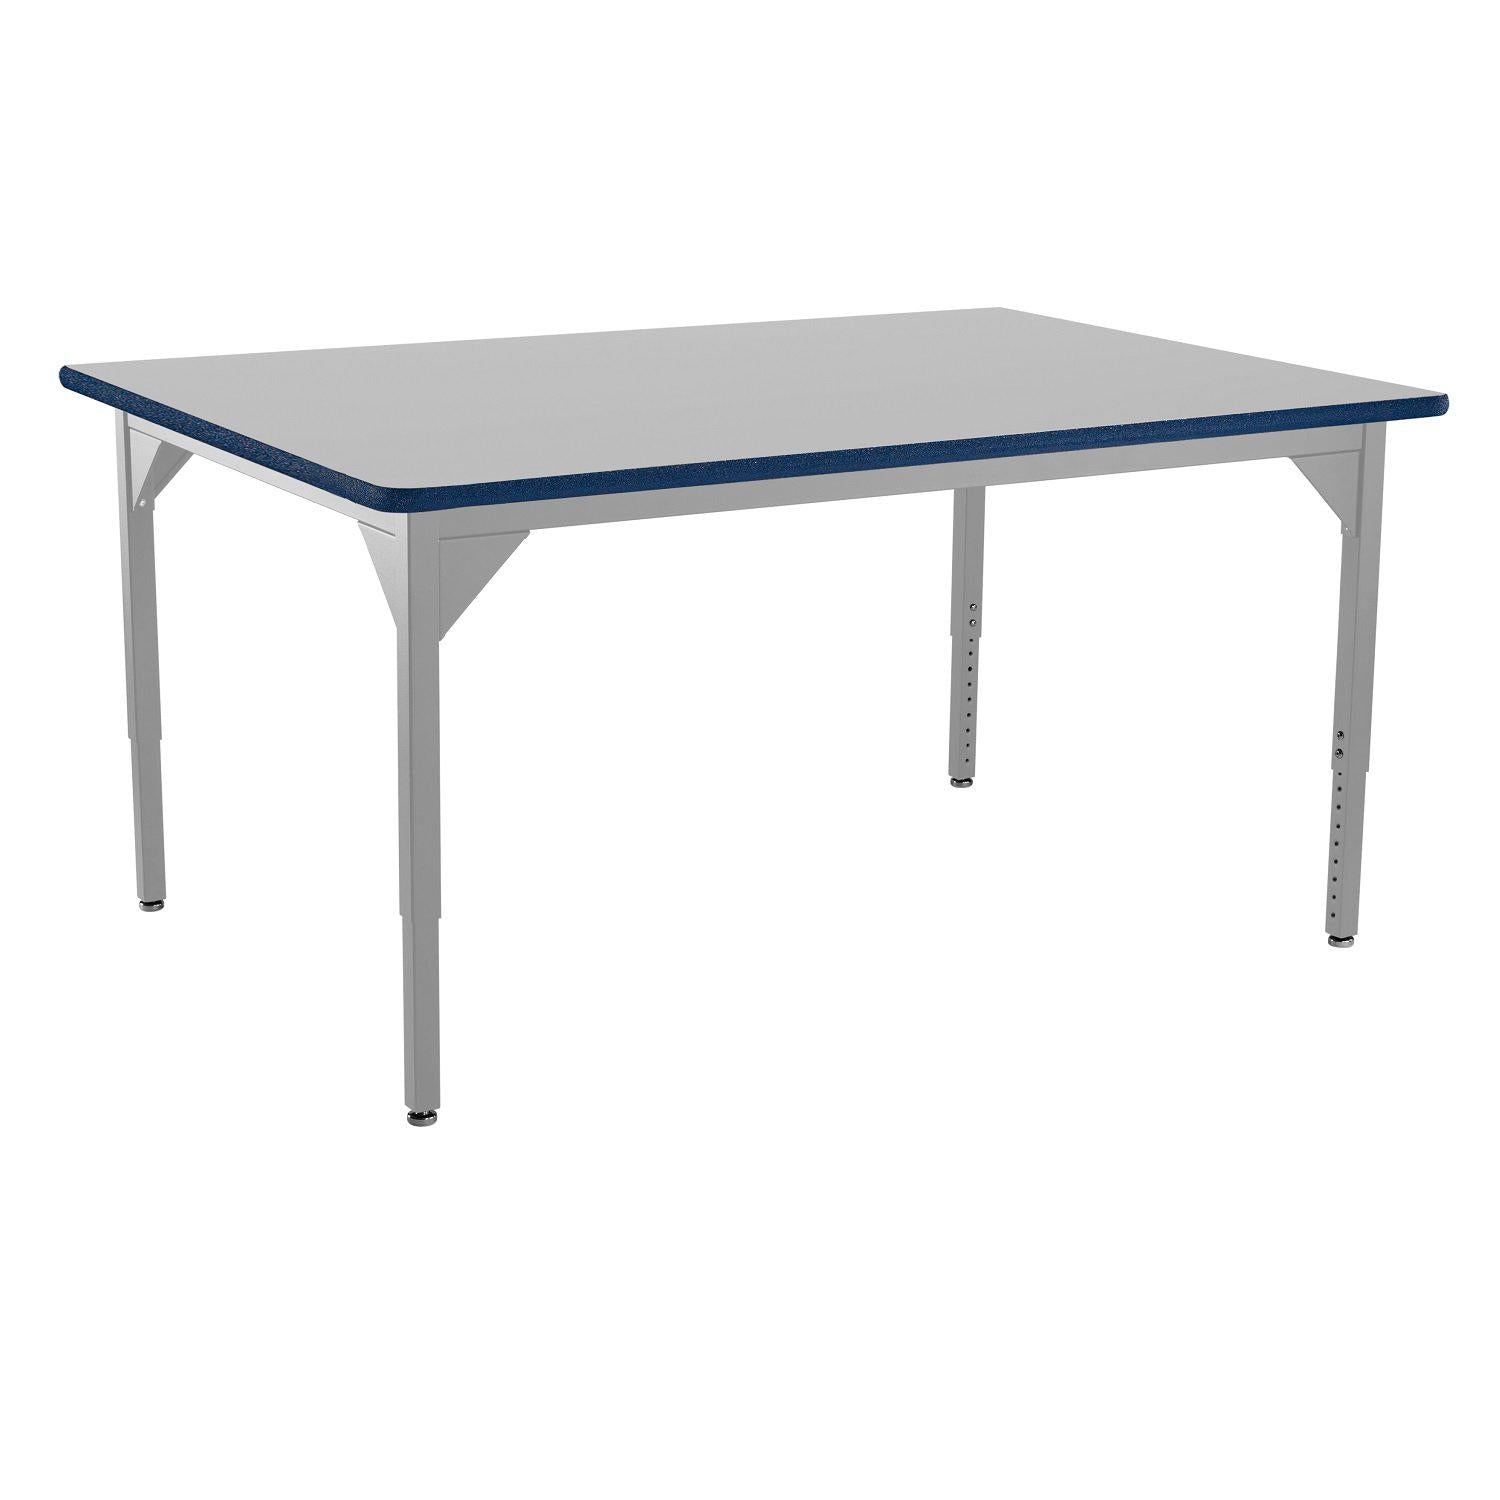 Heavy-Duty Height-Adjustable Utility Table, Soft Grey Frame, 42" x 60", Supreme High-Pressure Laminate Top with Black ProtectEdge